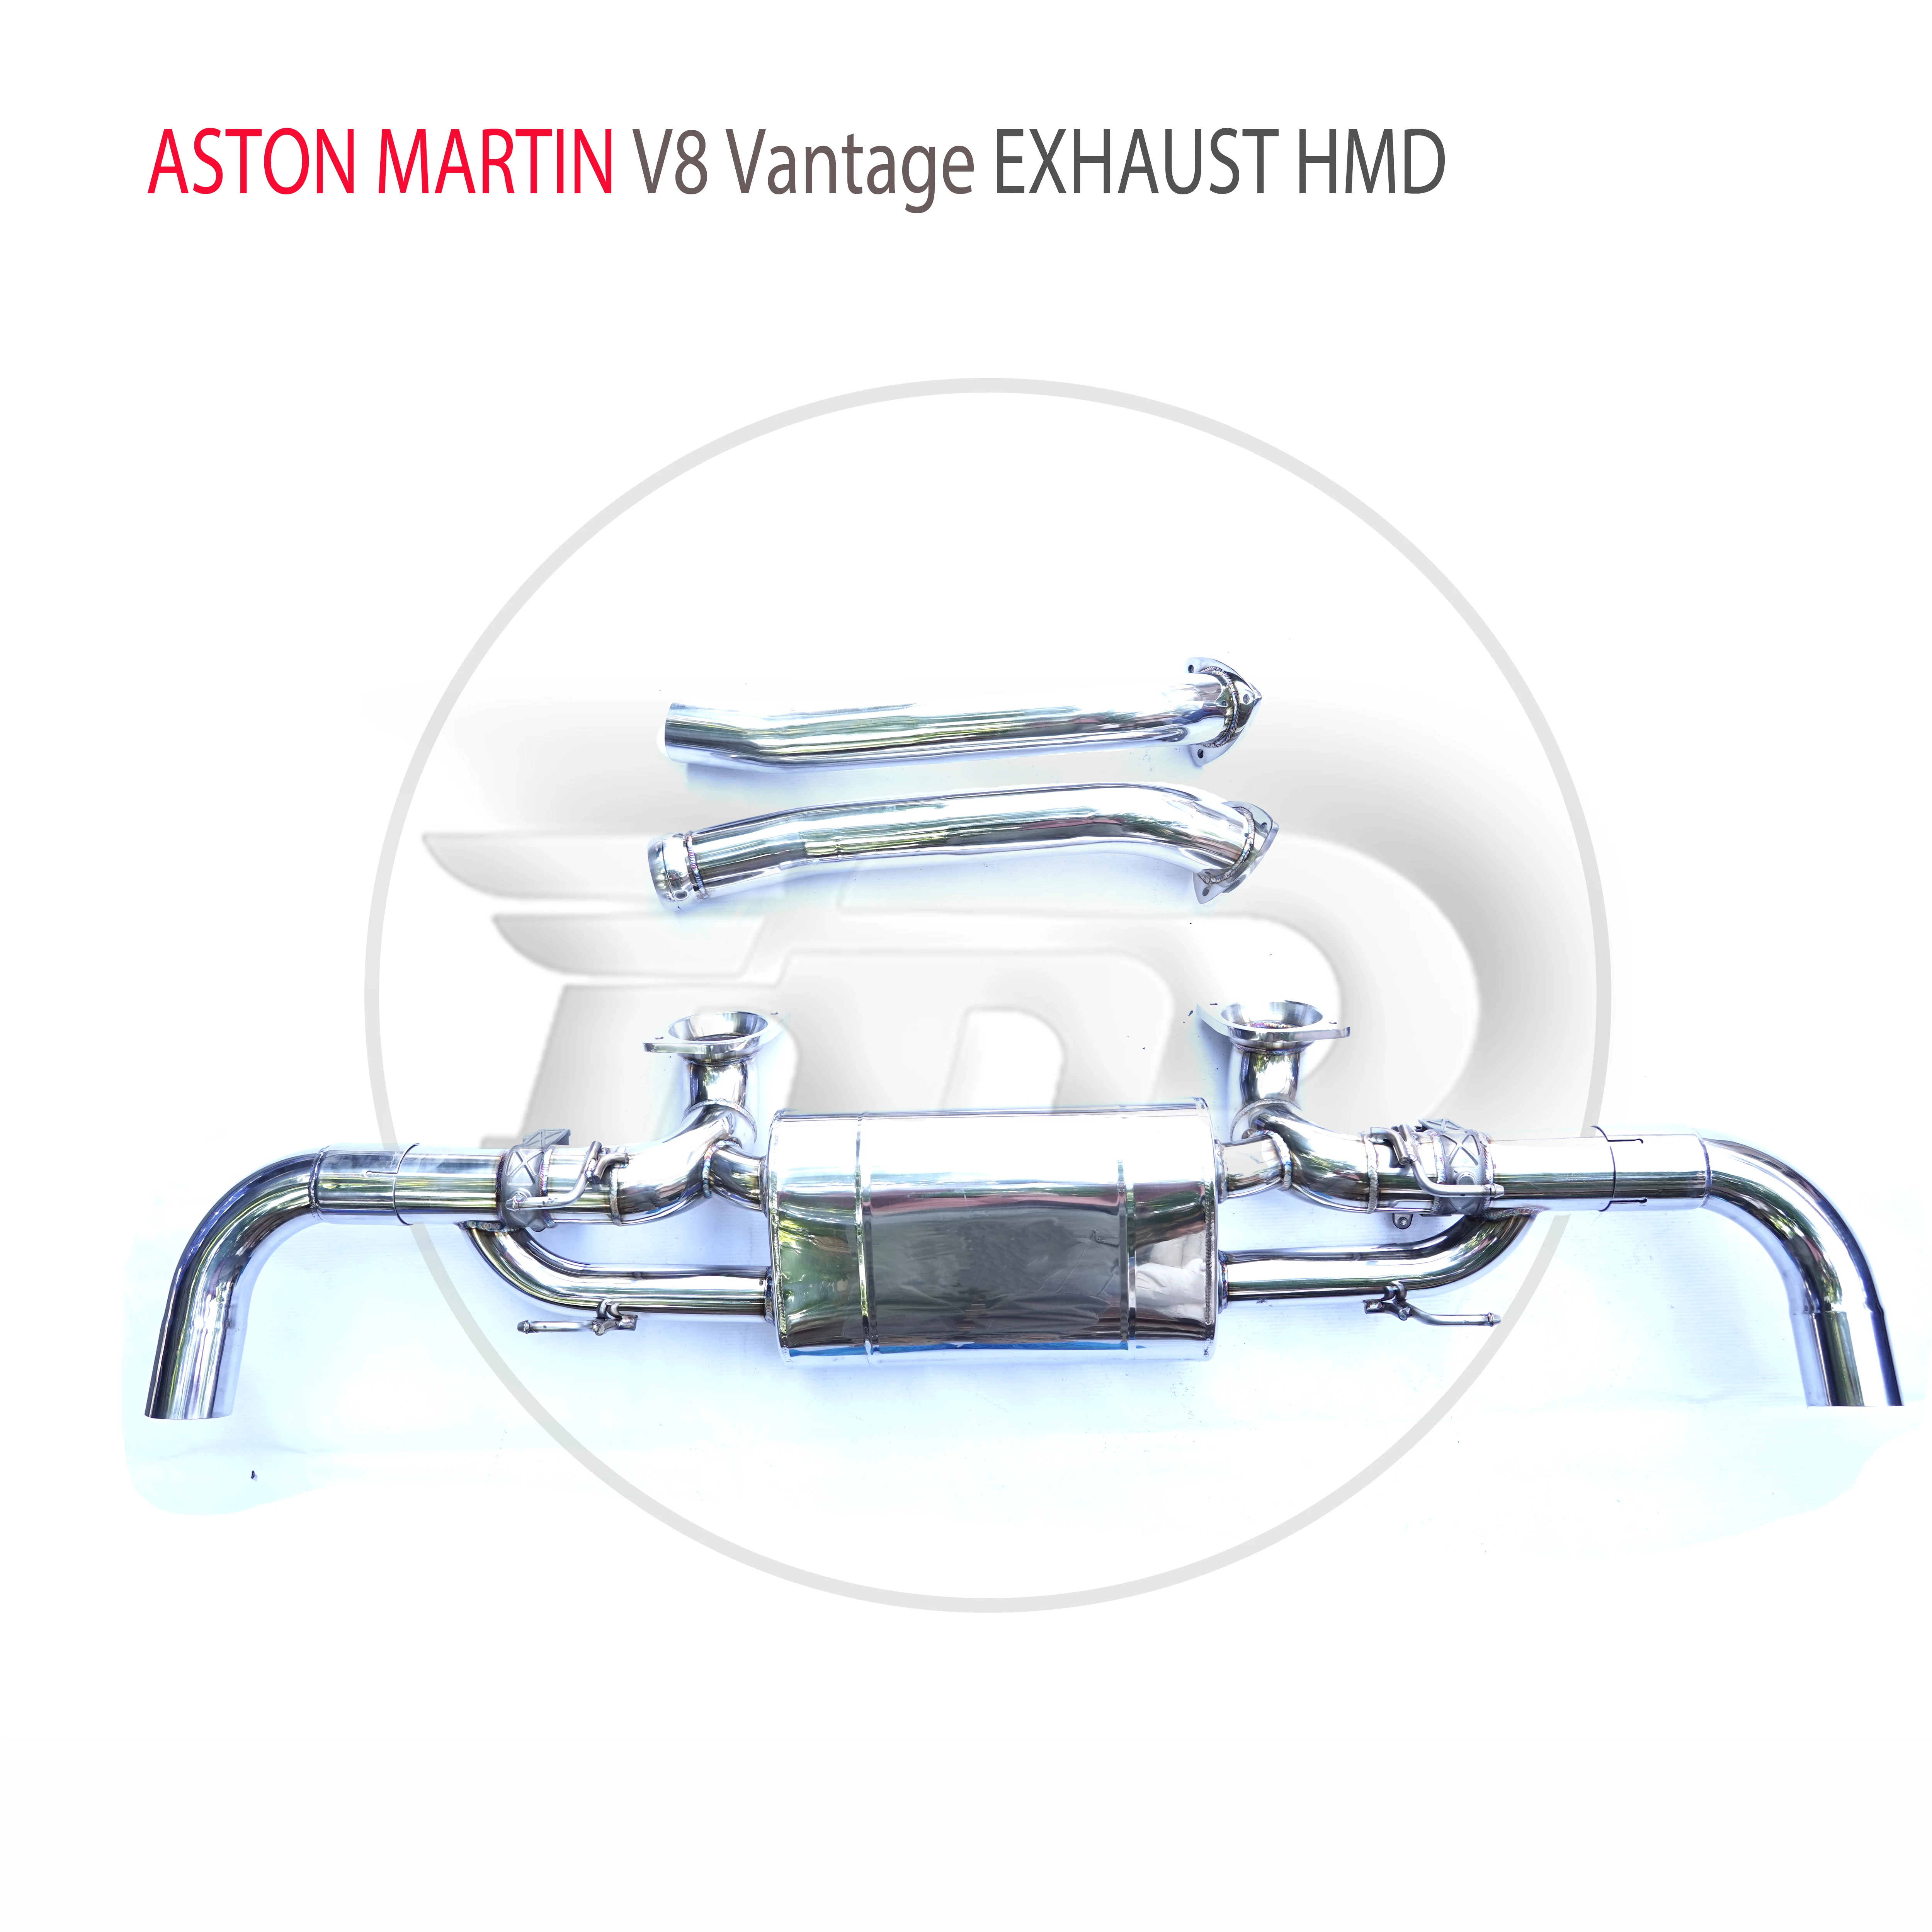 

HMD Stainless Steel Exhaust System Manifold is Suitable for Aston Martin Vantage V8 4.0T Auto Modification Valve Muffler For Car